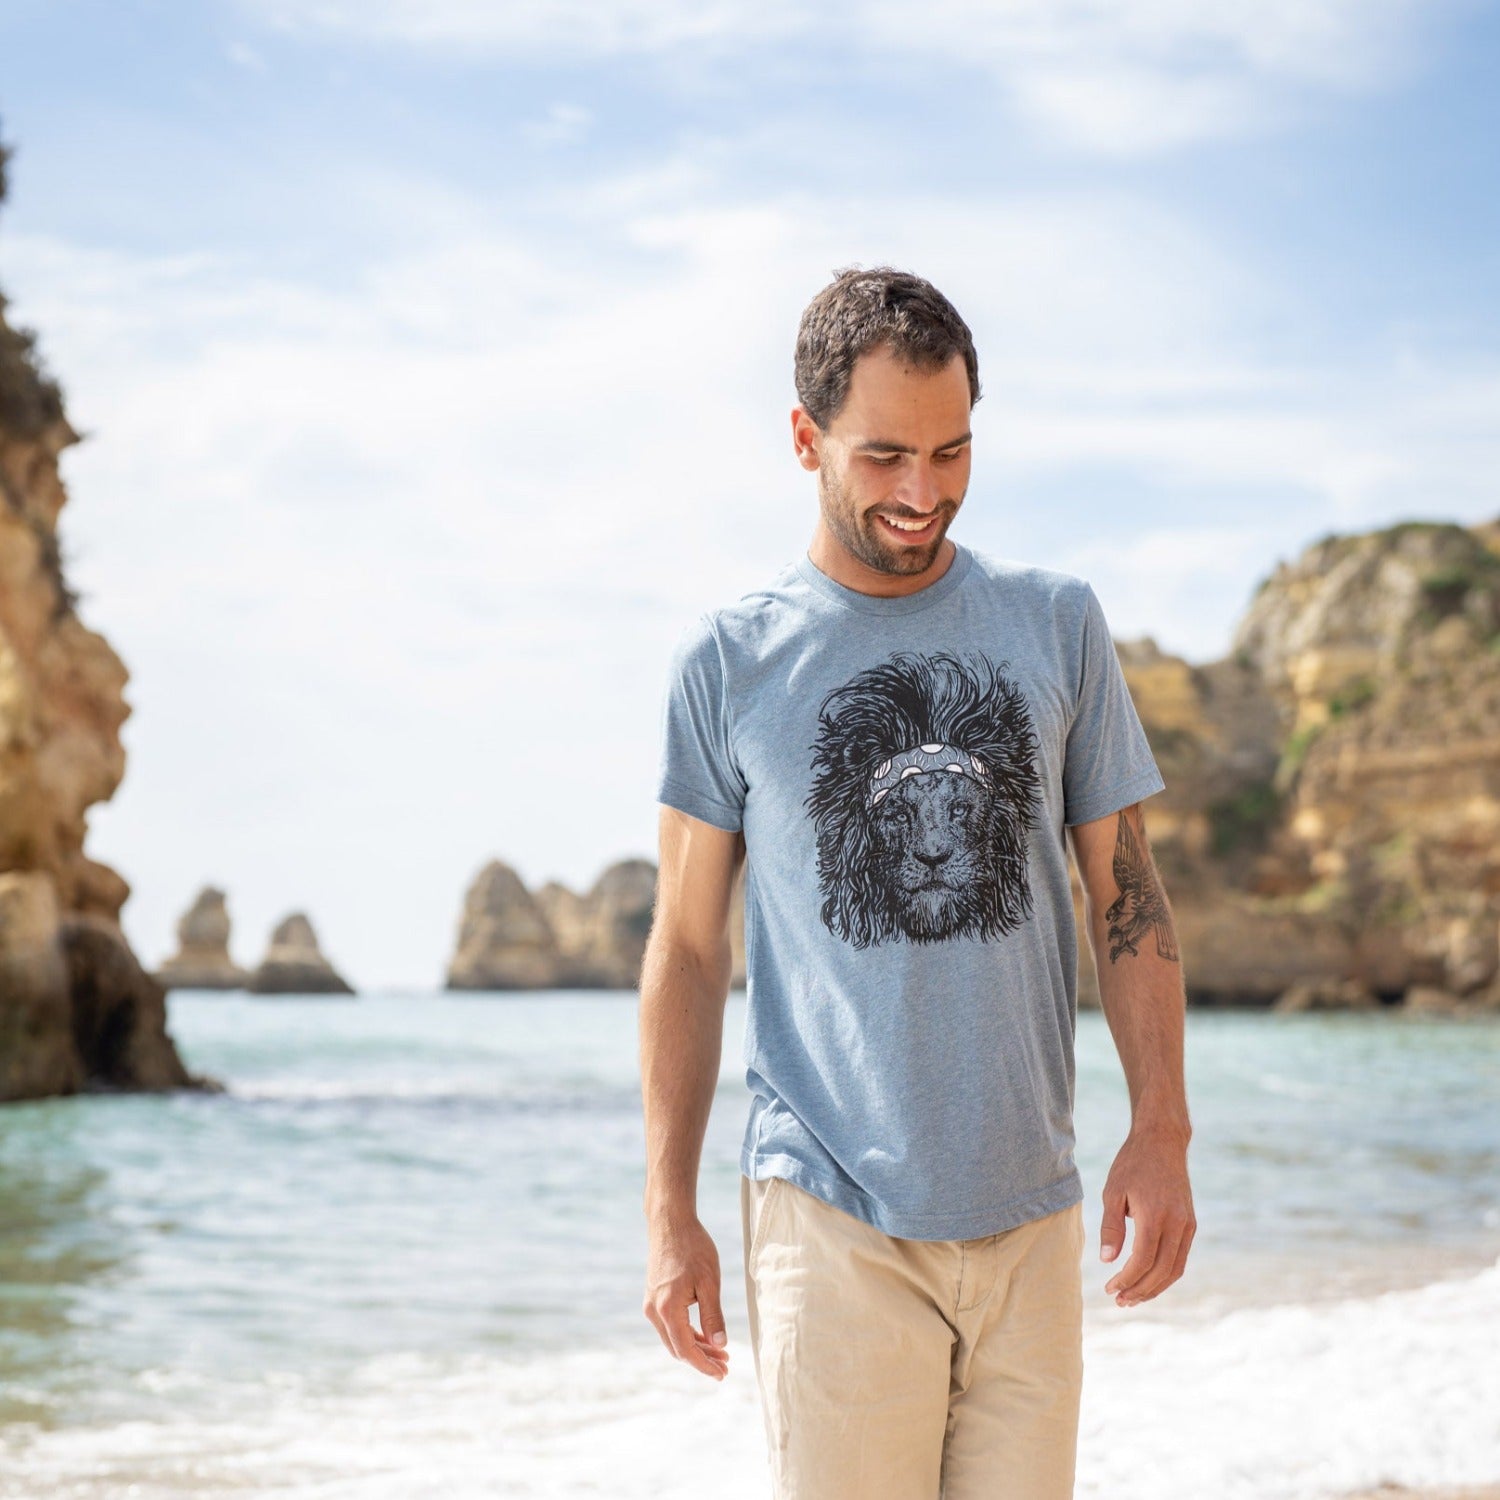 Man on beach with water and rocky coast in background. Man is wearing a steal blue tee with a screen printed lion wearing a headband on it. 